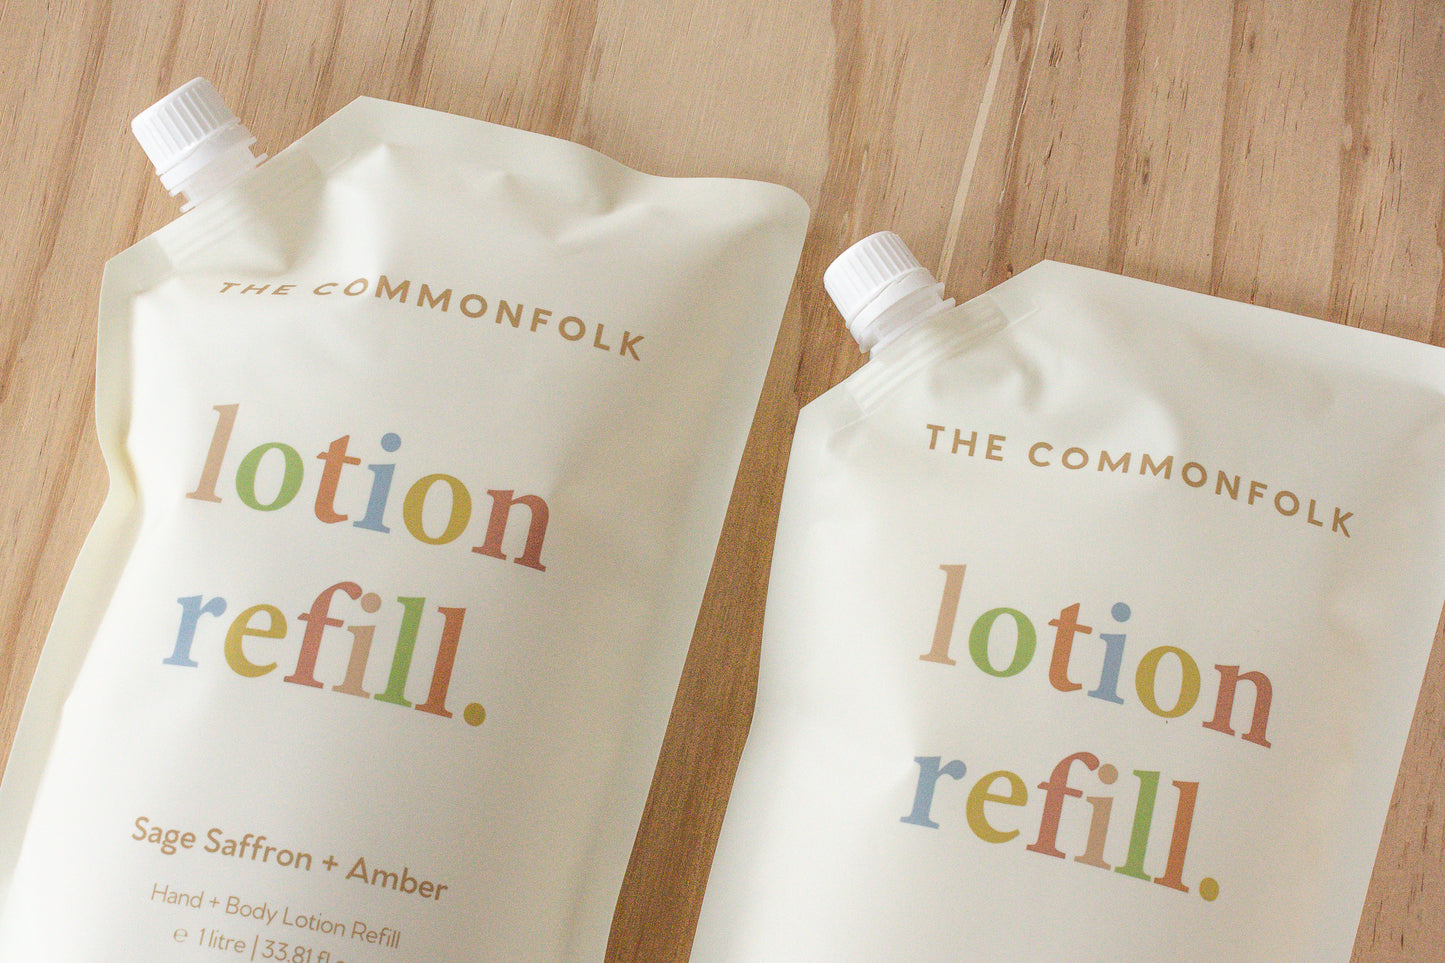 Hand + Body Lotion ~ Refill